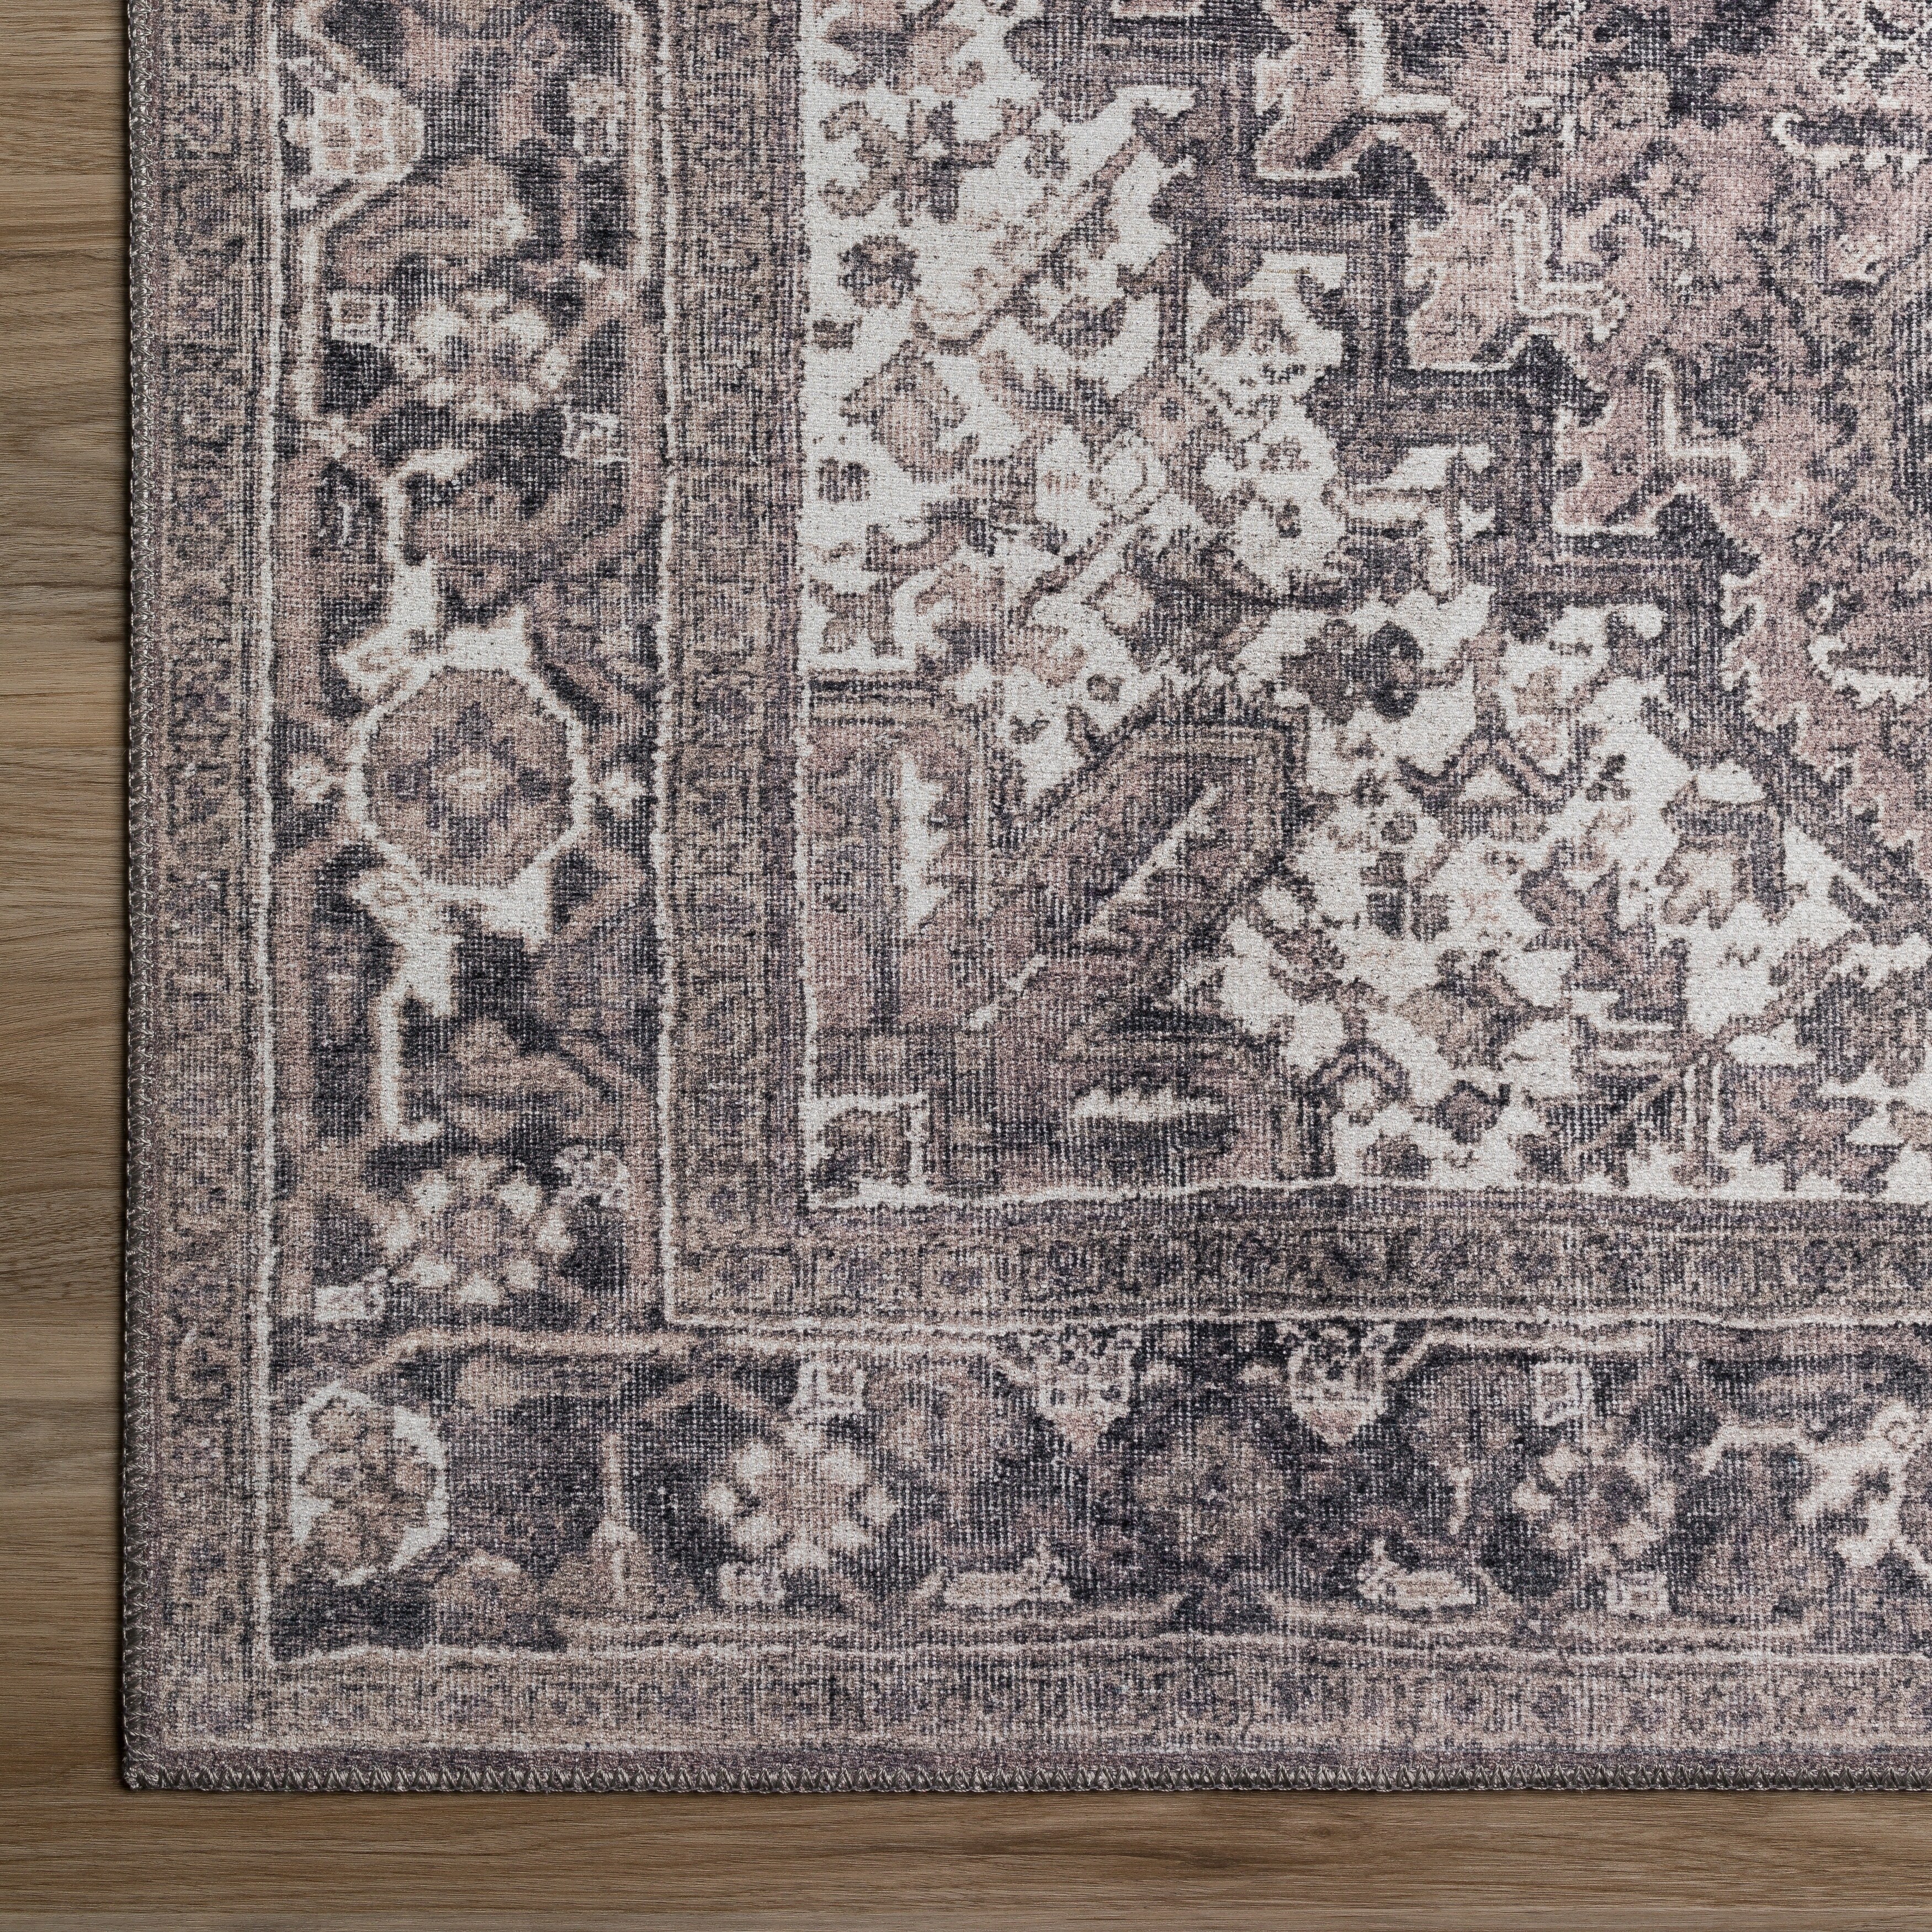 https://ak1.ostkcdn.com/images/products/is/images/direct/e5b2dcb4a47e8af91c6e64305fed3298c8a826f0/Addison-Kensington-Vintage-Persian-Non-Skid-Rug.jpg